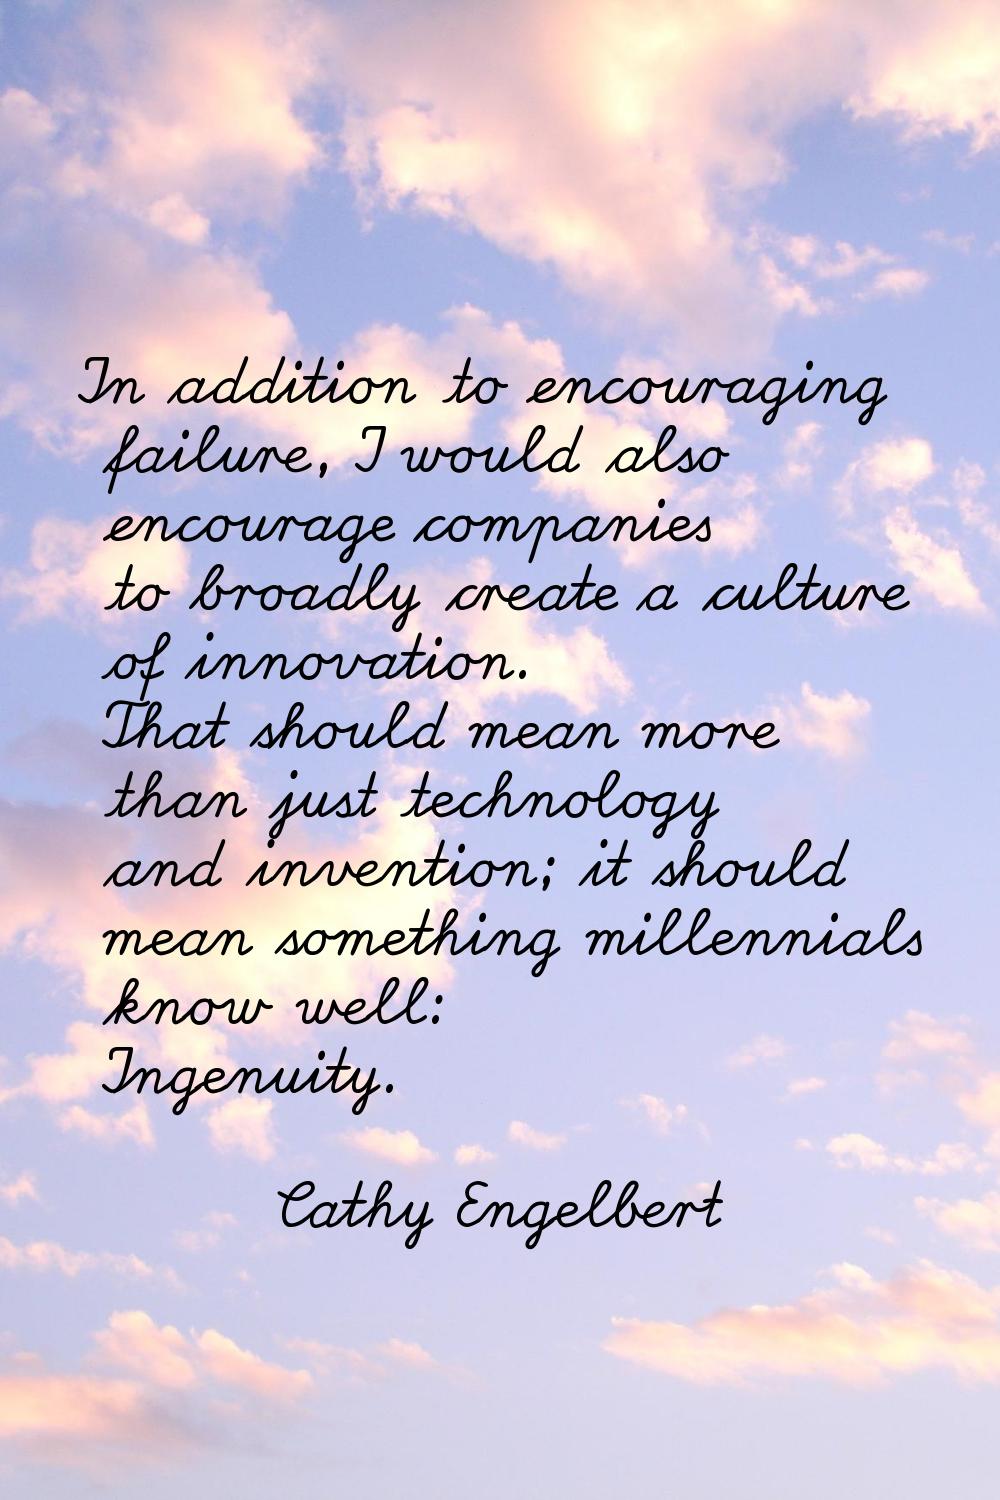 In addition to encouraging failure, I would also encourage companies to broadly create a culture of